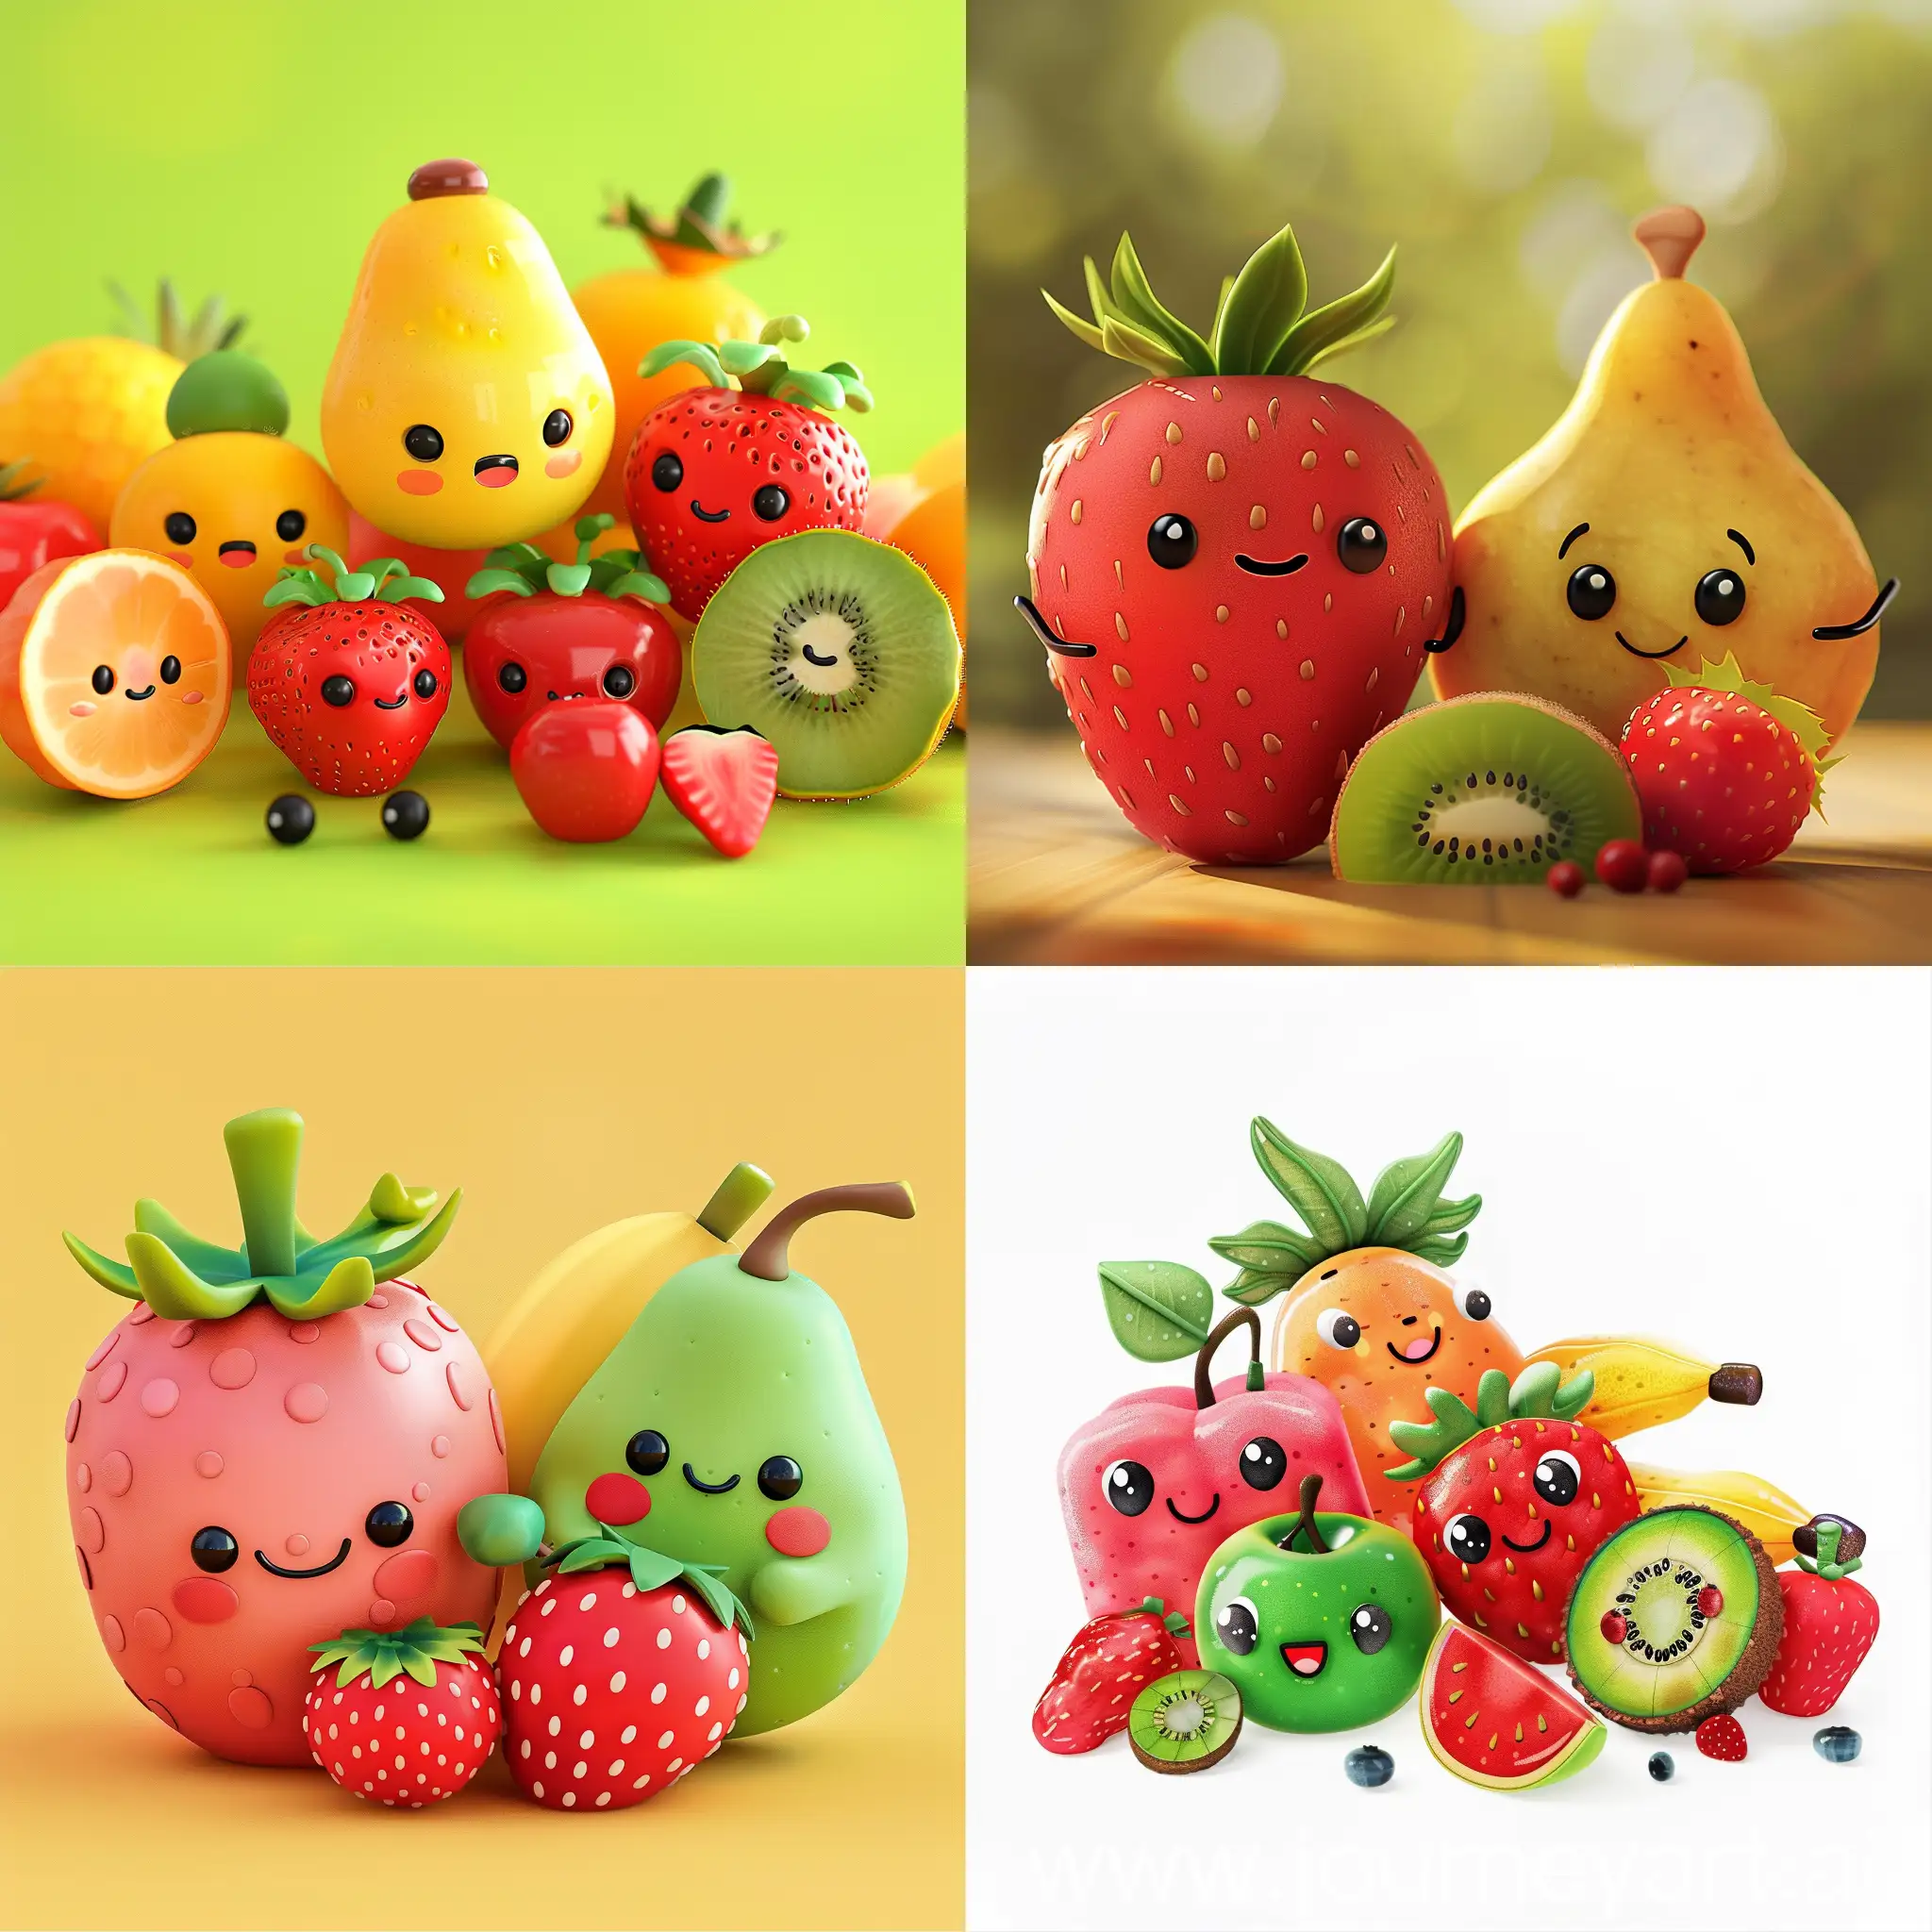 Colorful-2D-Fruits-Illustration-Playful-and-Vibrant-Fruit-Characters